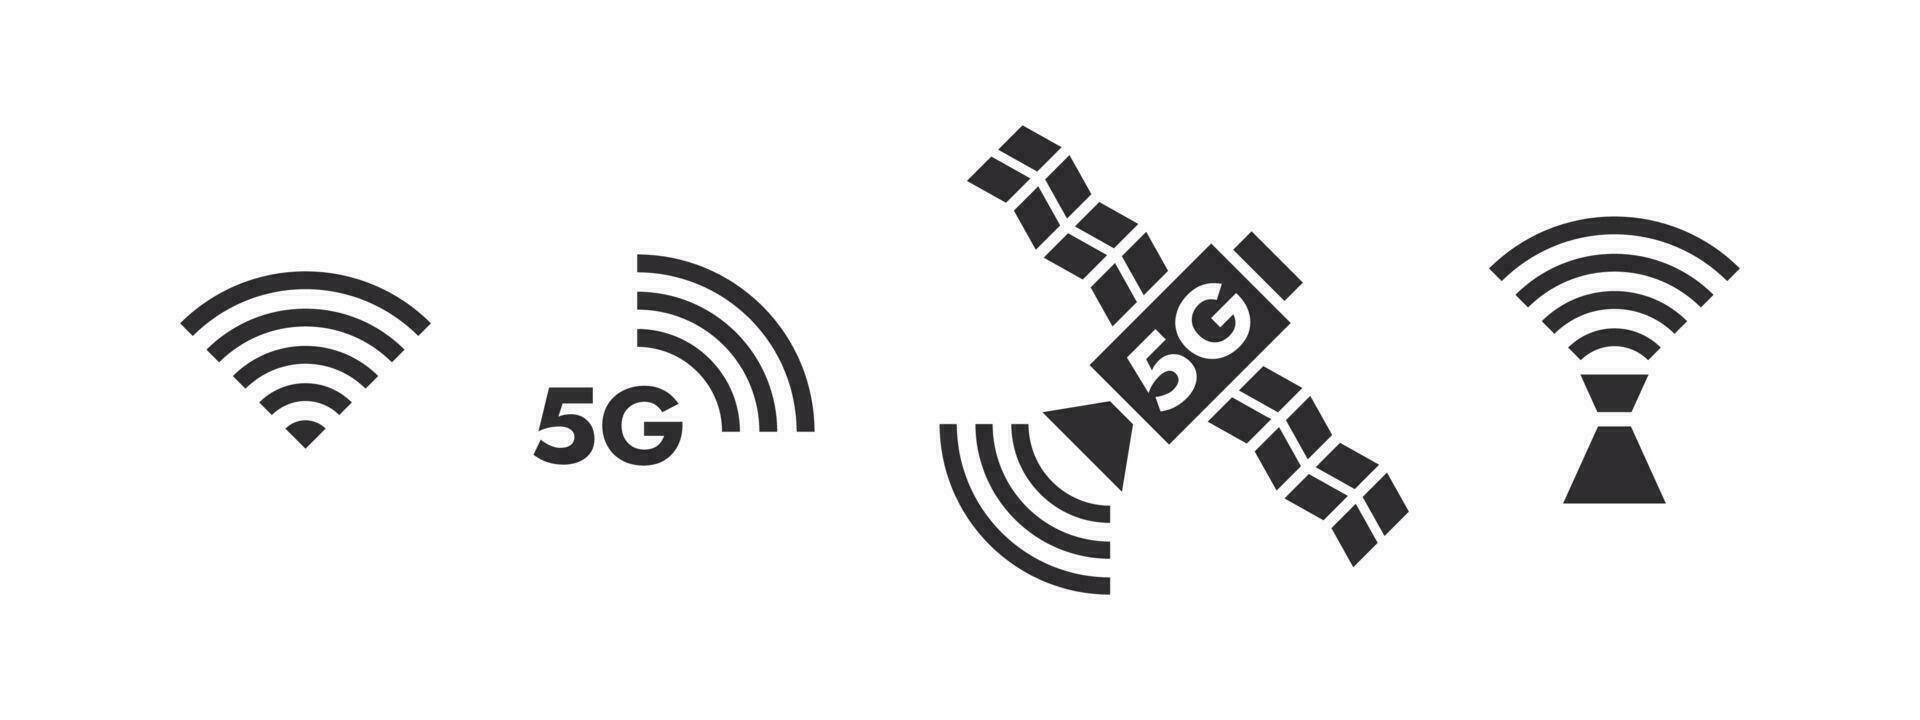 5G Satellite Internet high speed wireless. 5G network. Wireless connectivity icons. Vector scalable graphics